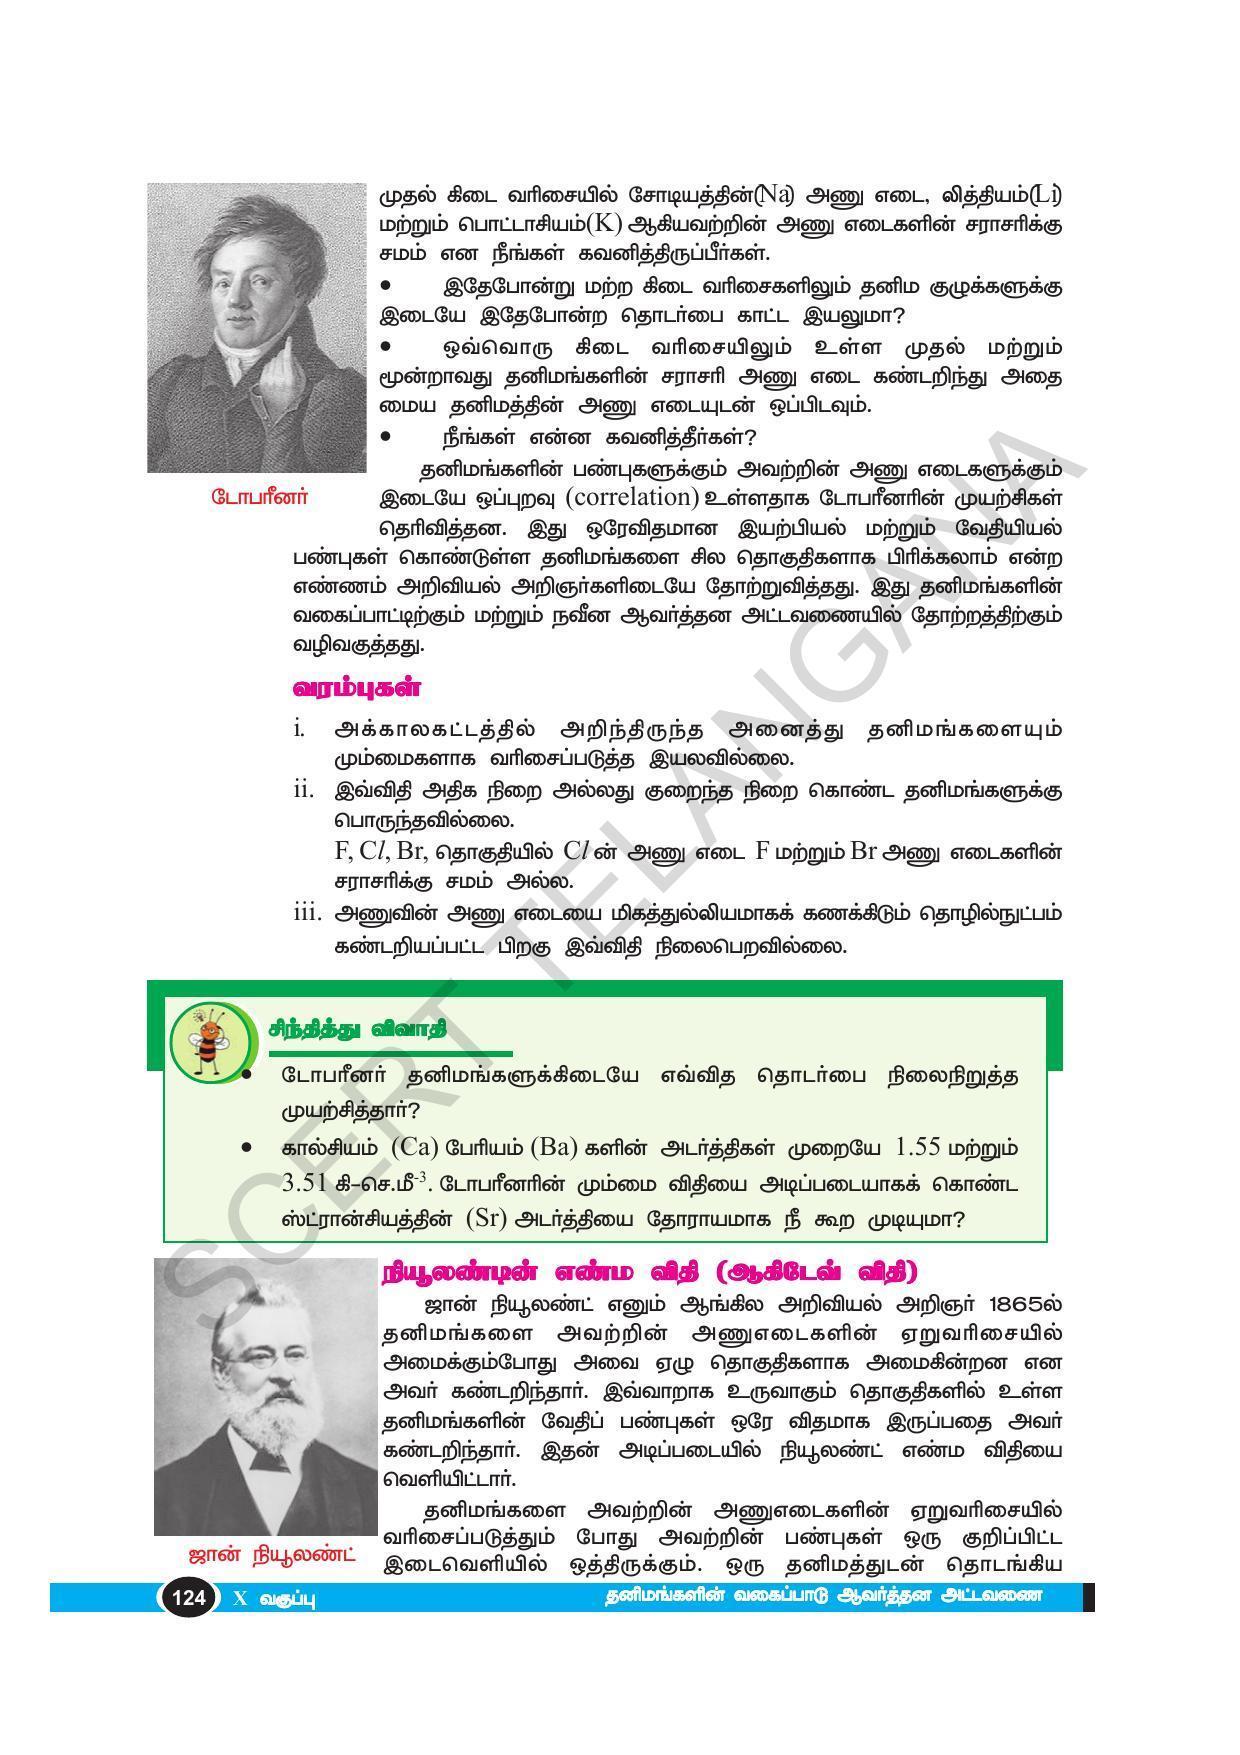 TS SCERT Class 10 Physical Science(Tamil Medium) Text Book - Page 136